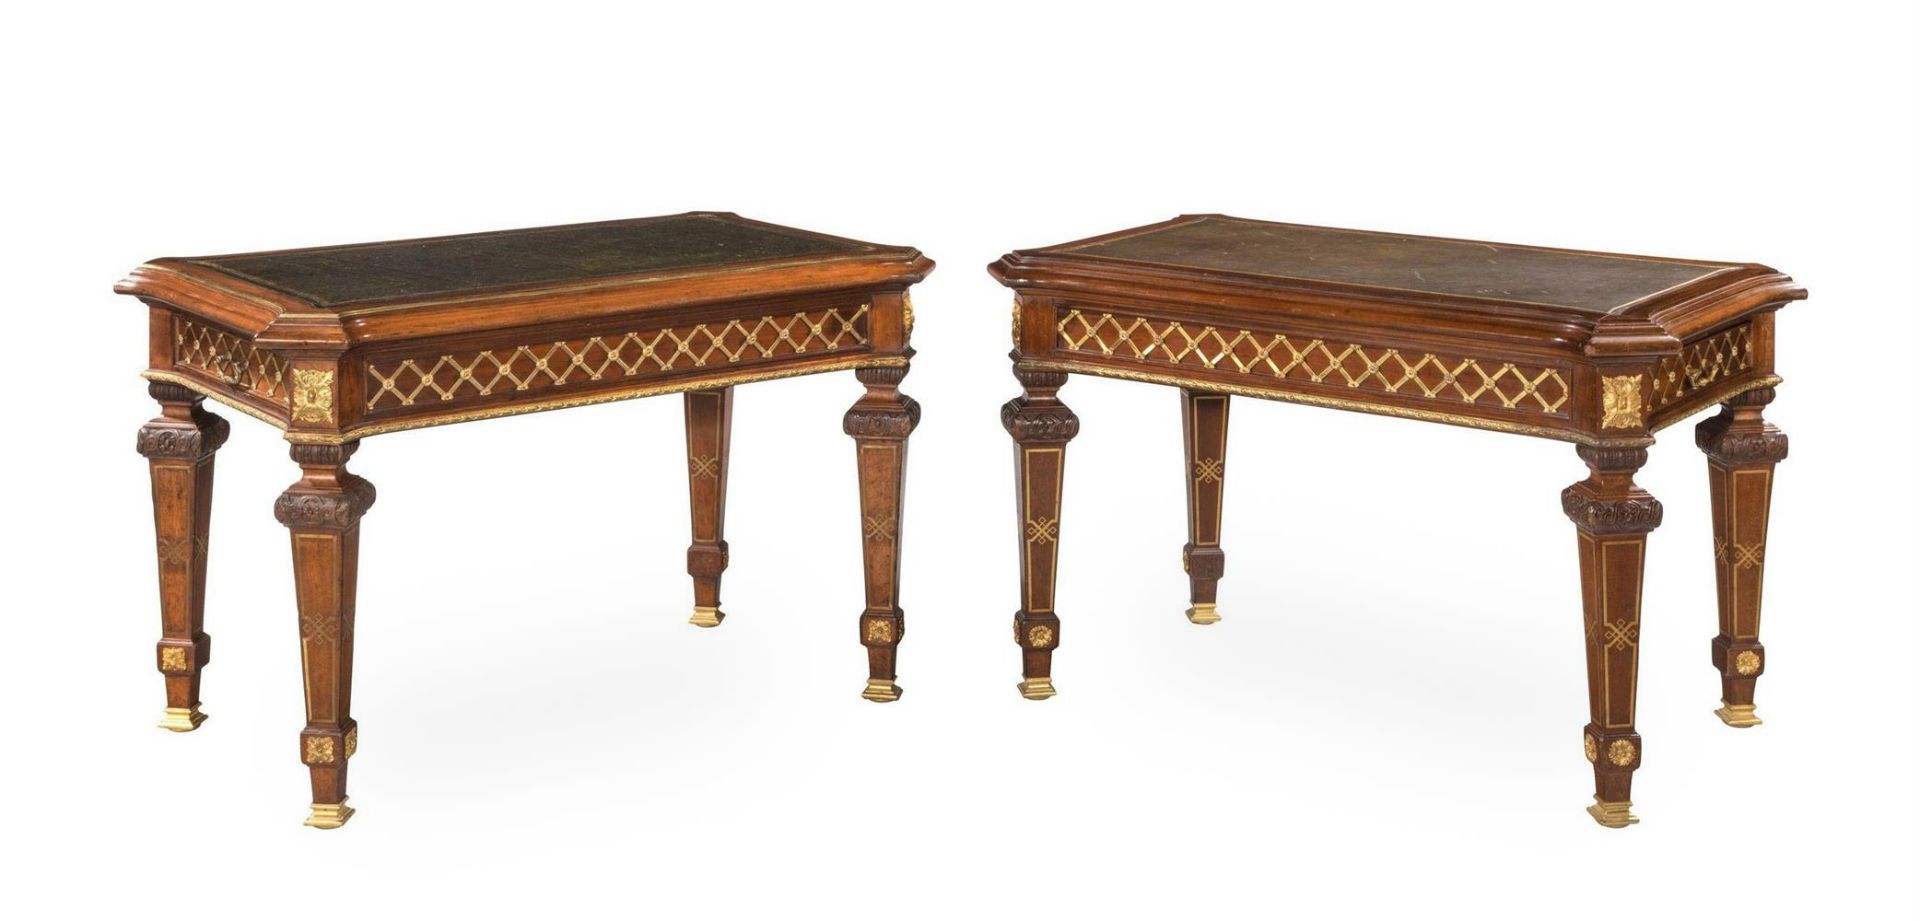 A PAIR OF MAHOGANY, BRASS INLAID AND GILT METAL MOUNTED LIBRARY TABLES, LATE 19TH/20TH CENTURY